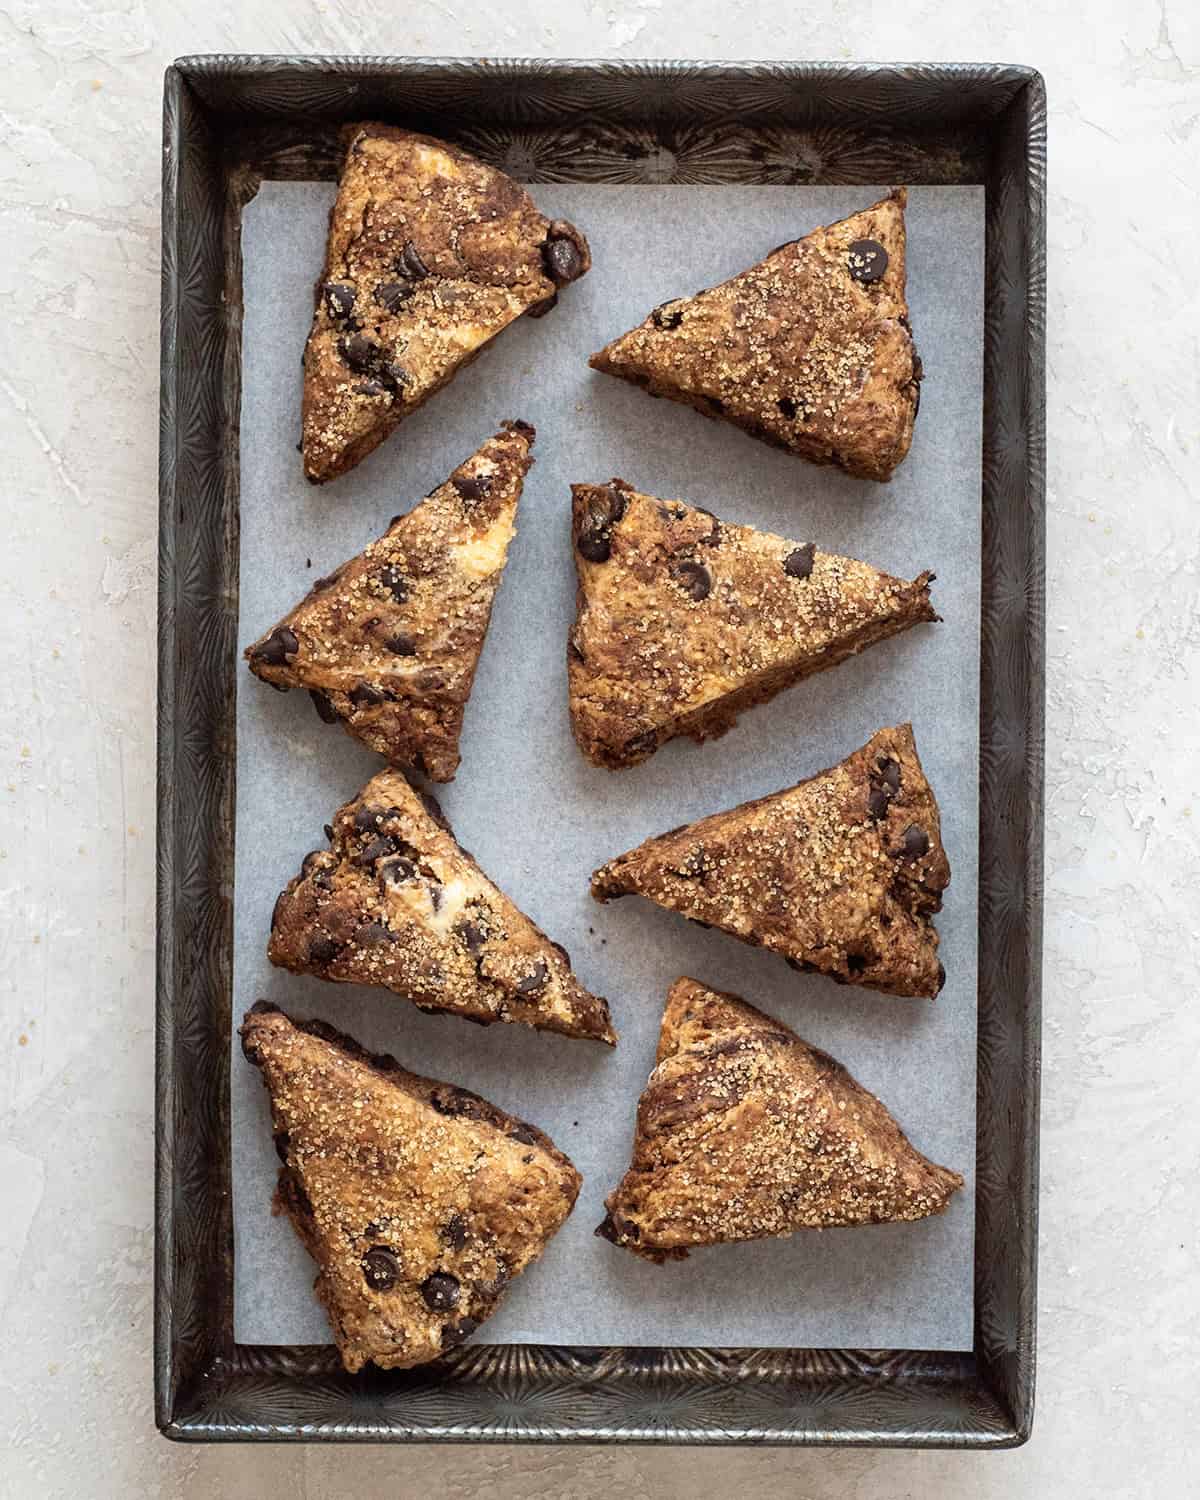 How to Make Chocolate Scones -on the baking sheet before baking